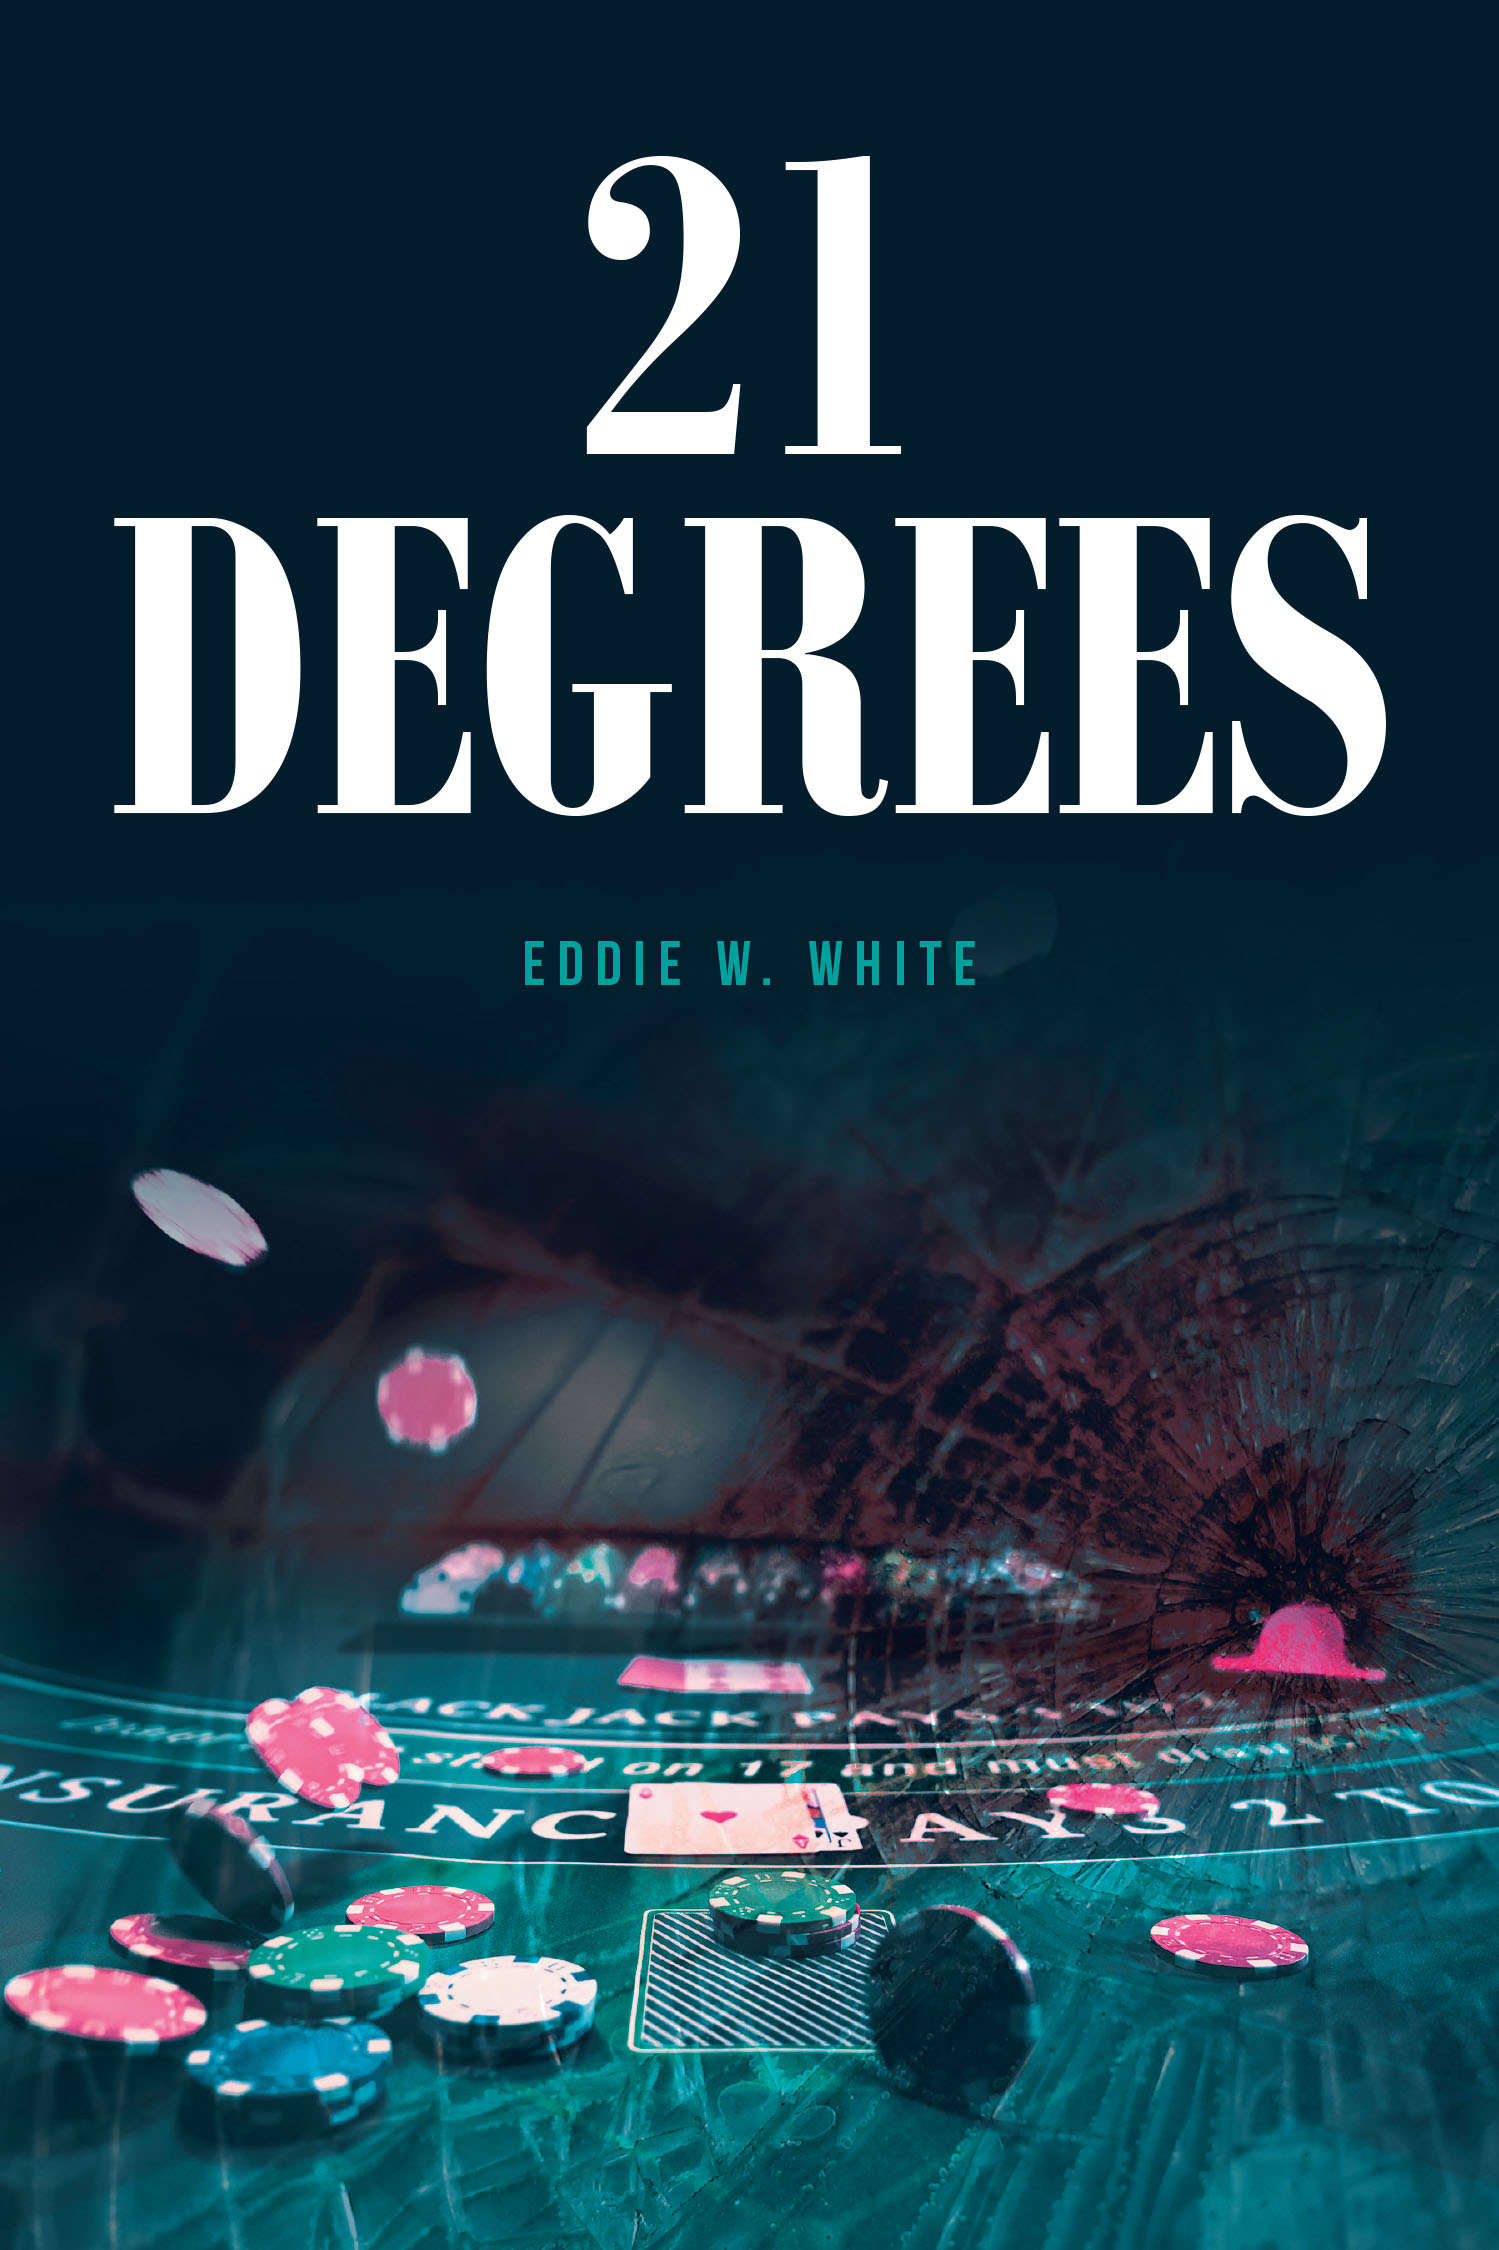 Eddie W. White’s New Book, "21 Degrees," is a Spellbinding Tale That Follows an FBI Agent and a Deputy Sheriff Who Are Thrust Into a Murder Mystery at a Casino